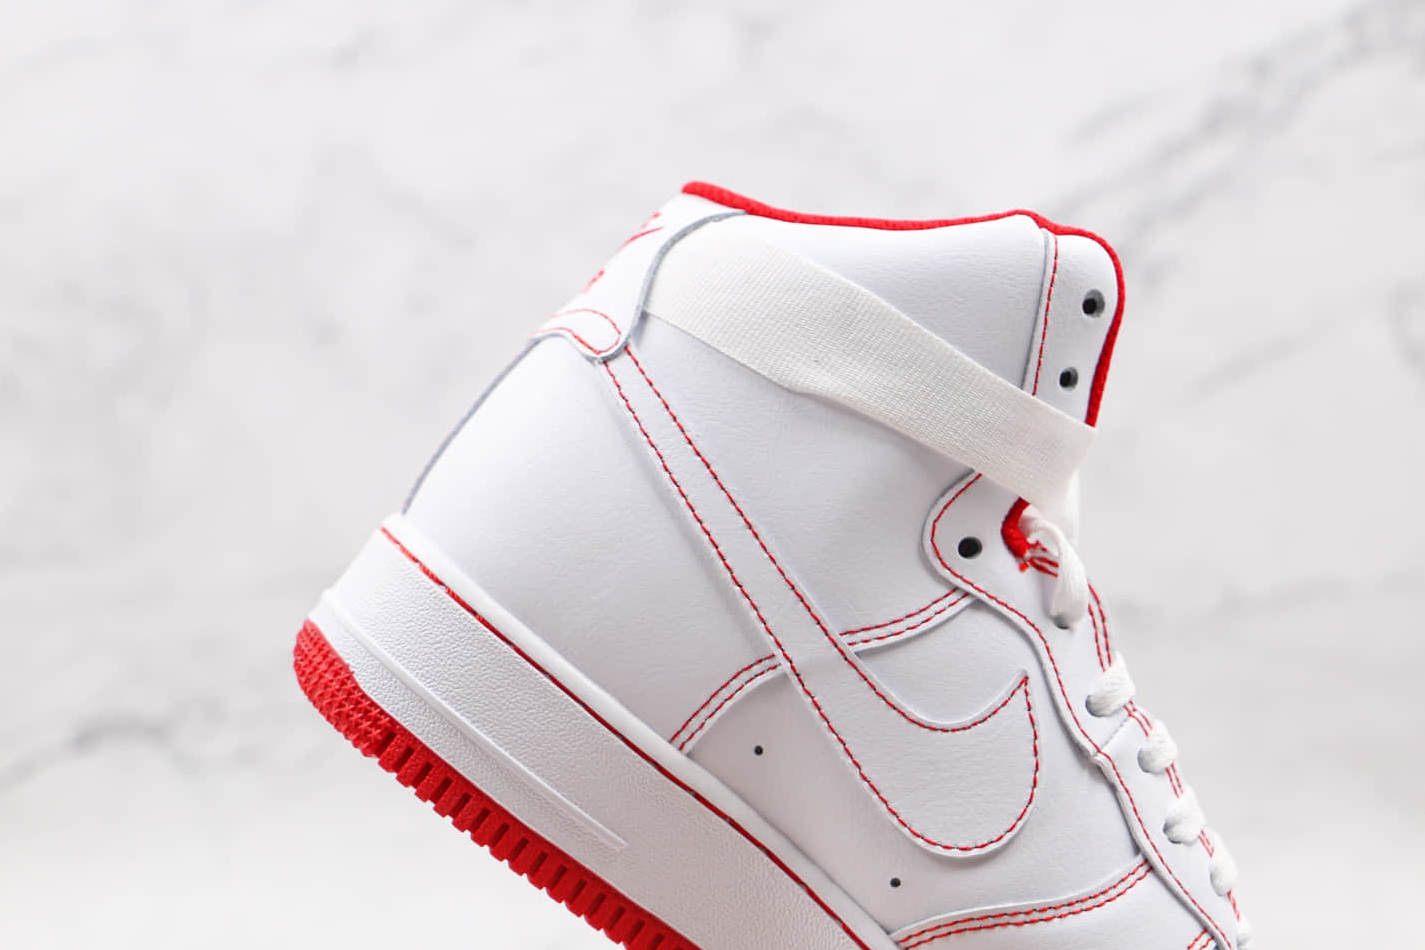 Nike Air Force 1 High '07 'University Red' CV1753-100 - Classic Sneakers in Striking Red